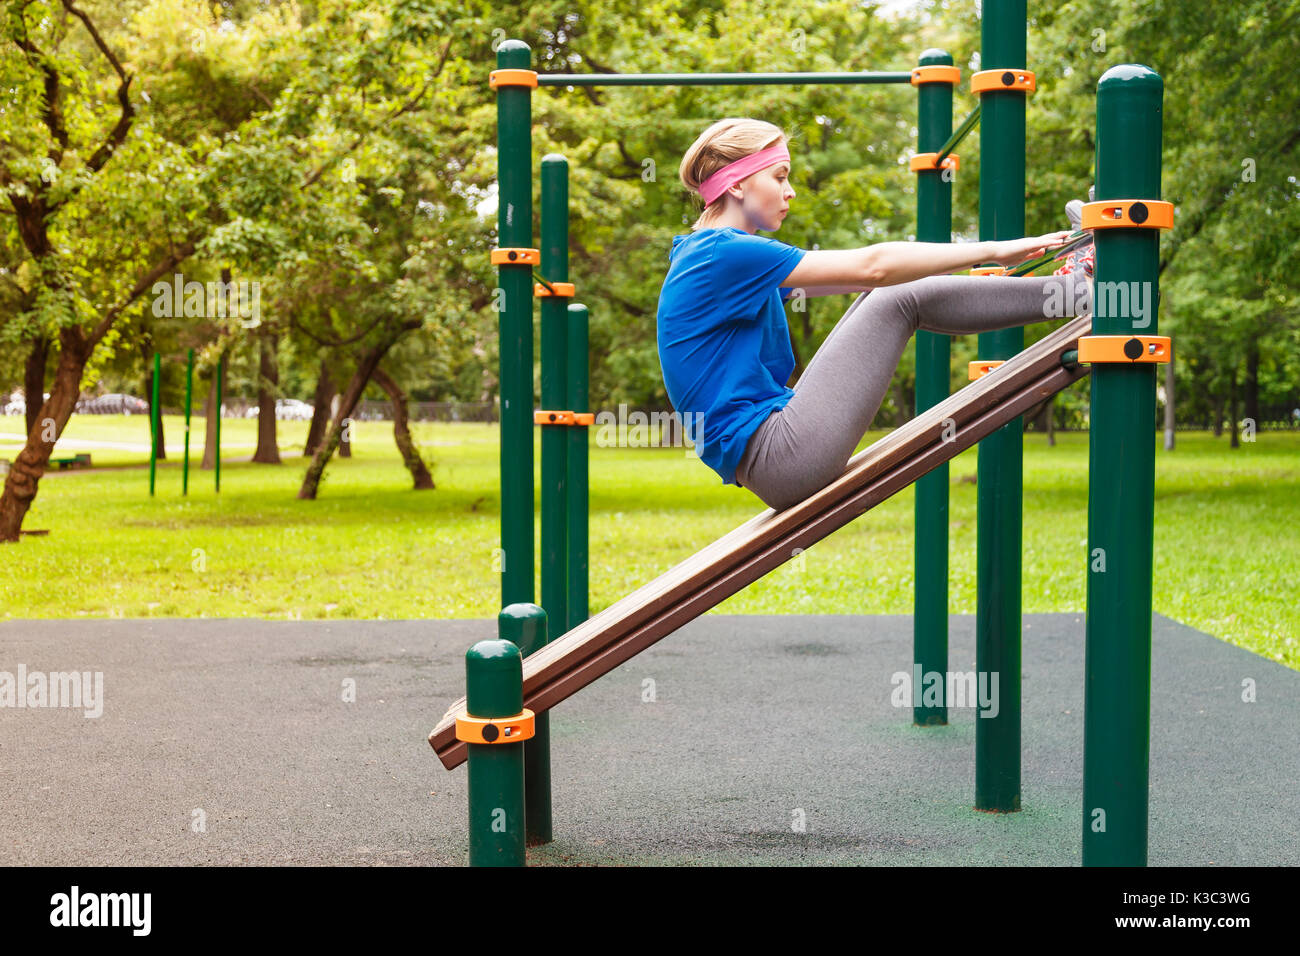 young beautiful girl swings the press in the gym outdoor sport place Stock Photo